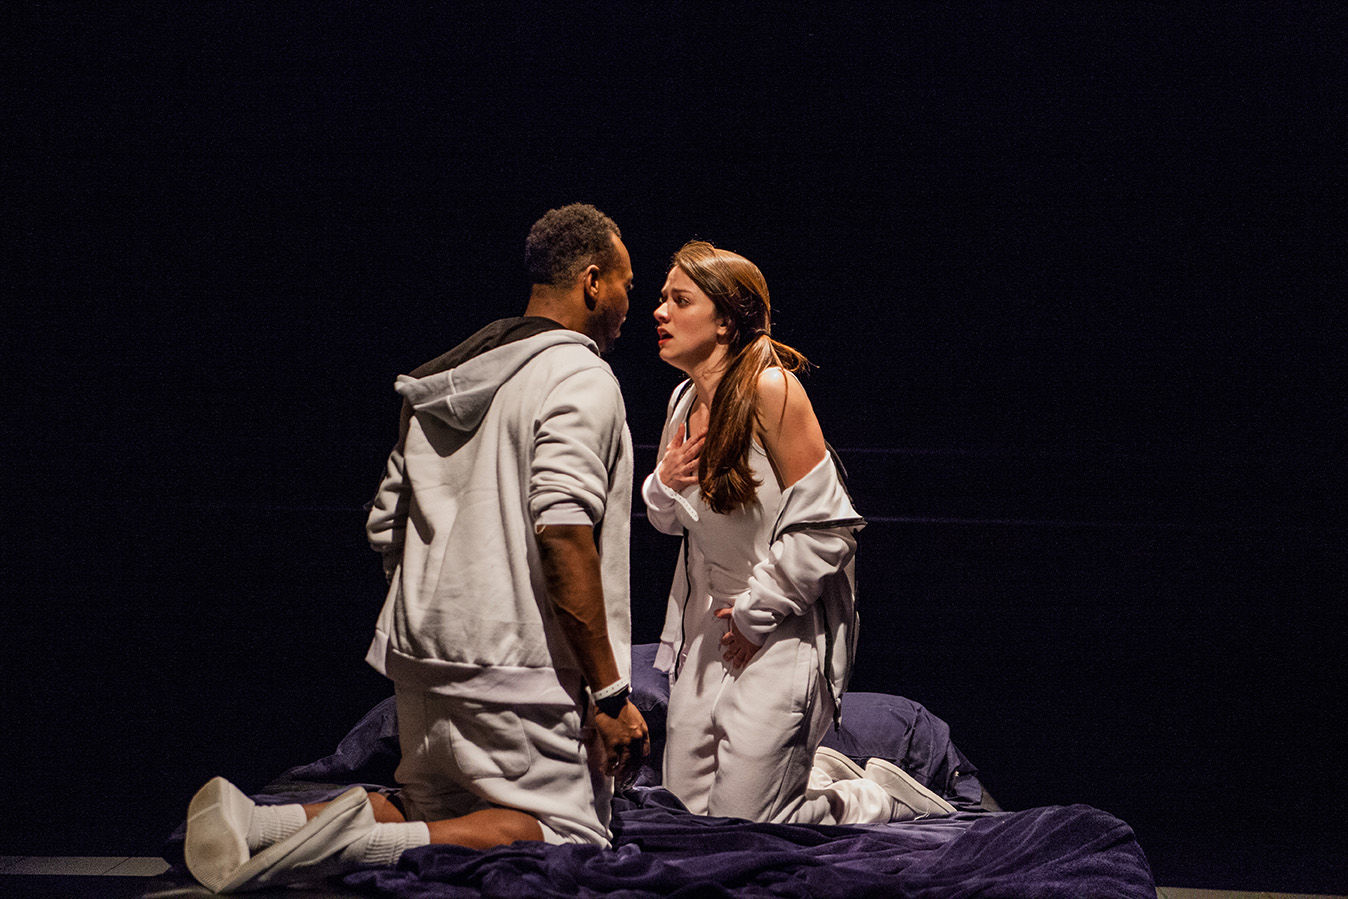 Ananias J. Dixon as Tristan and Olivia Scicolone as Connie. Photo / Steve Wagner Photography